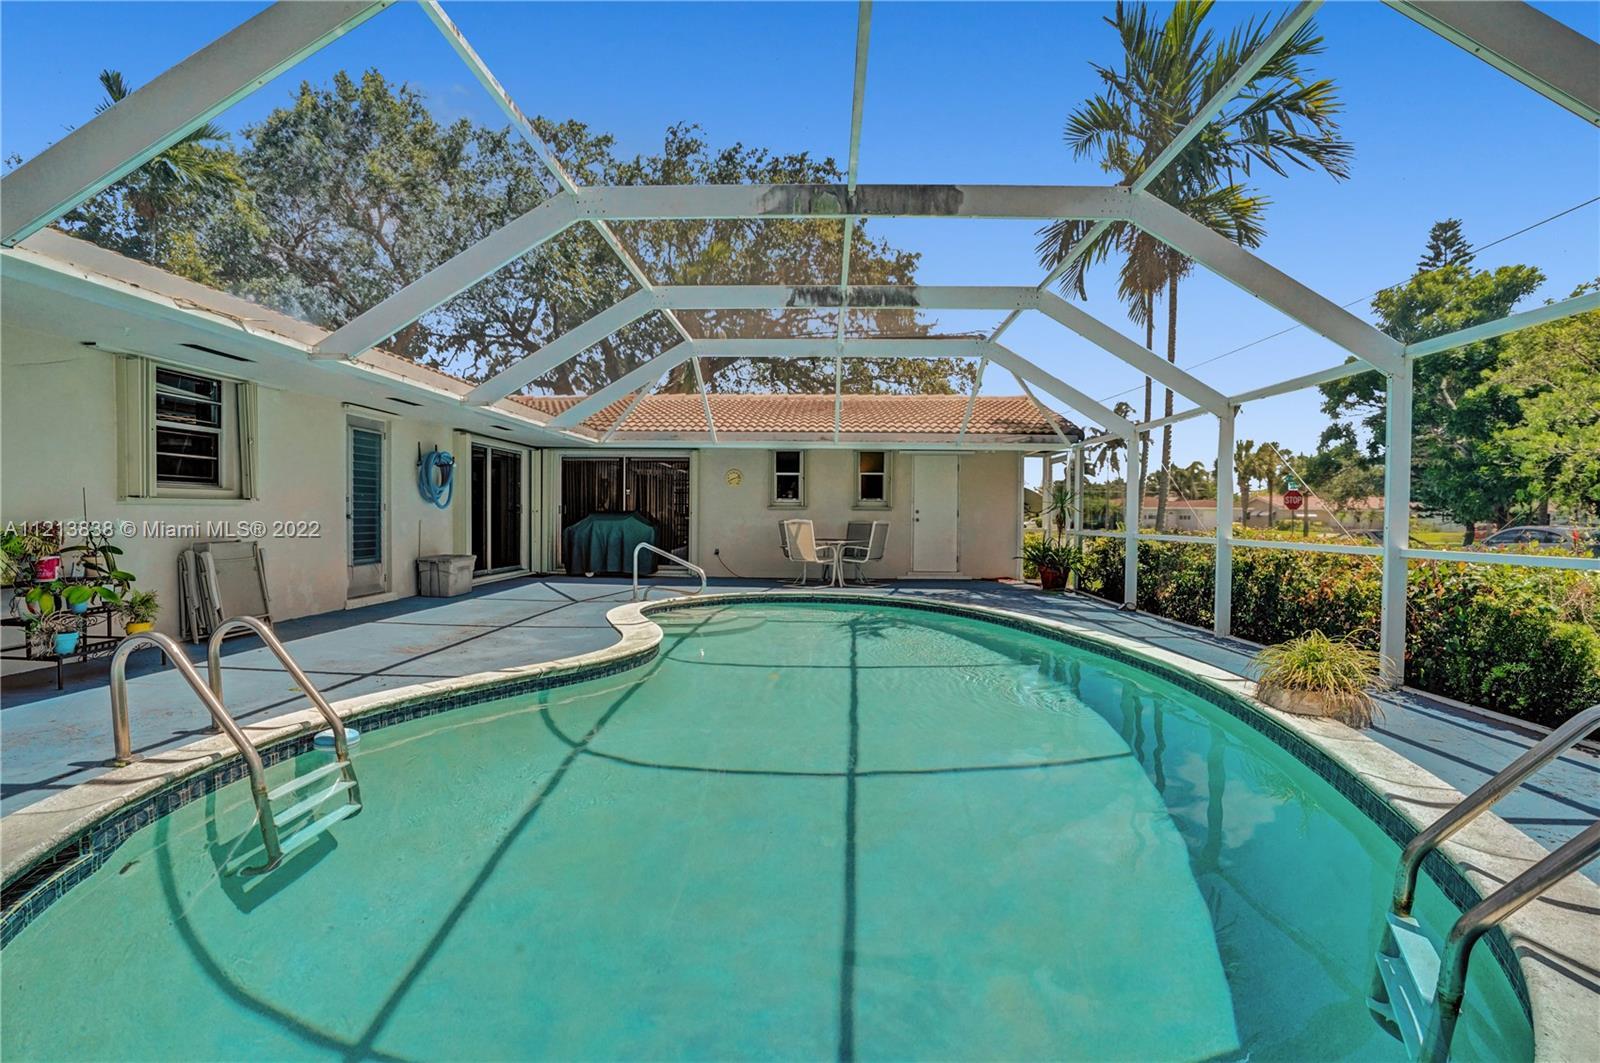 Beautiful pool home on a large corner lot, in the desirable Hollywood Hills. Bright and inviting spa